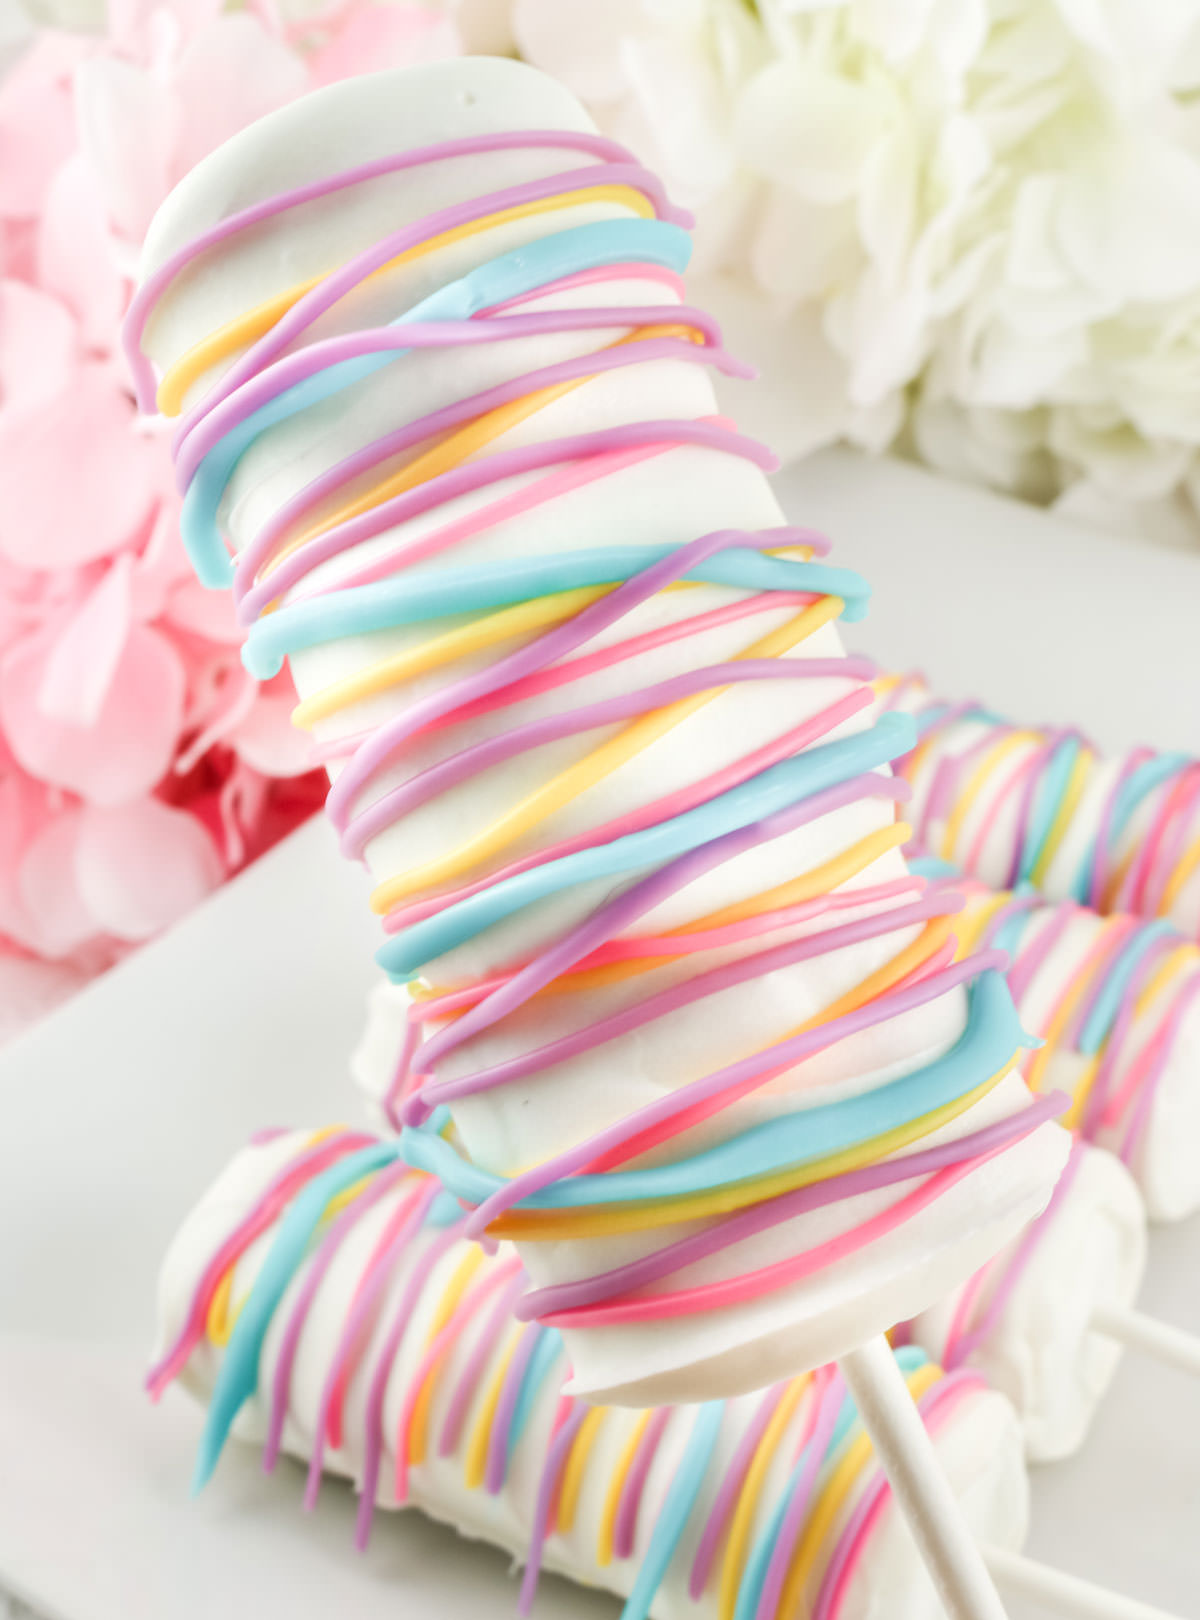 Close up of a White Chocolate Celebration Marshmallow Pop being held up by the lollipop stick over a plate of other pops.